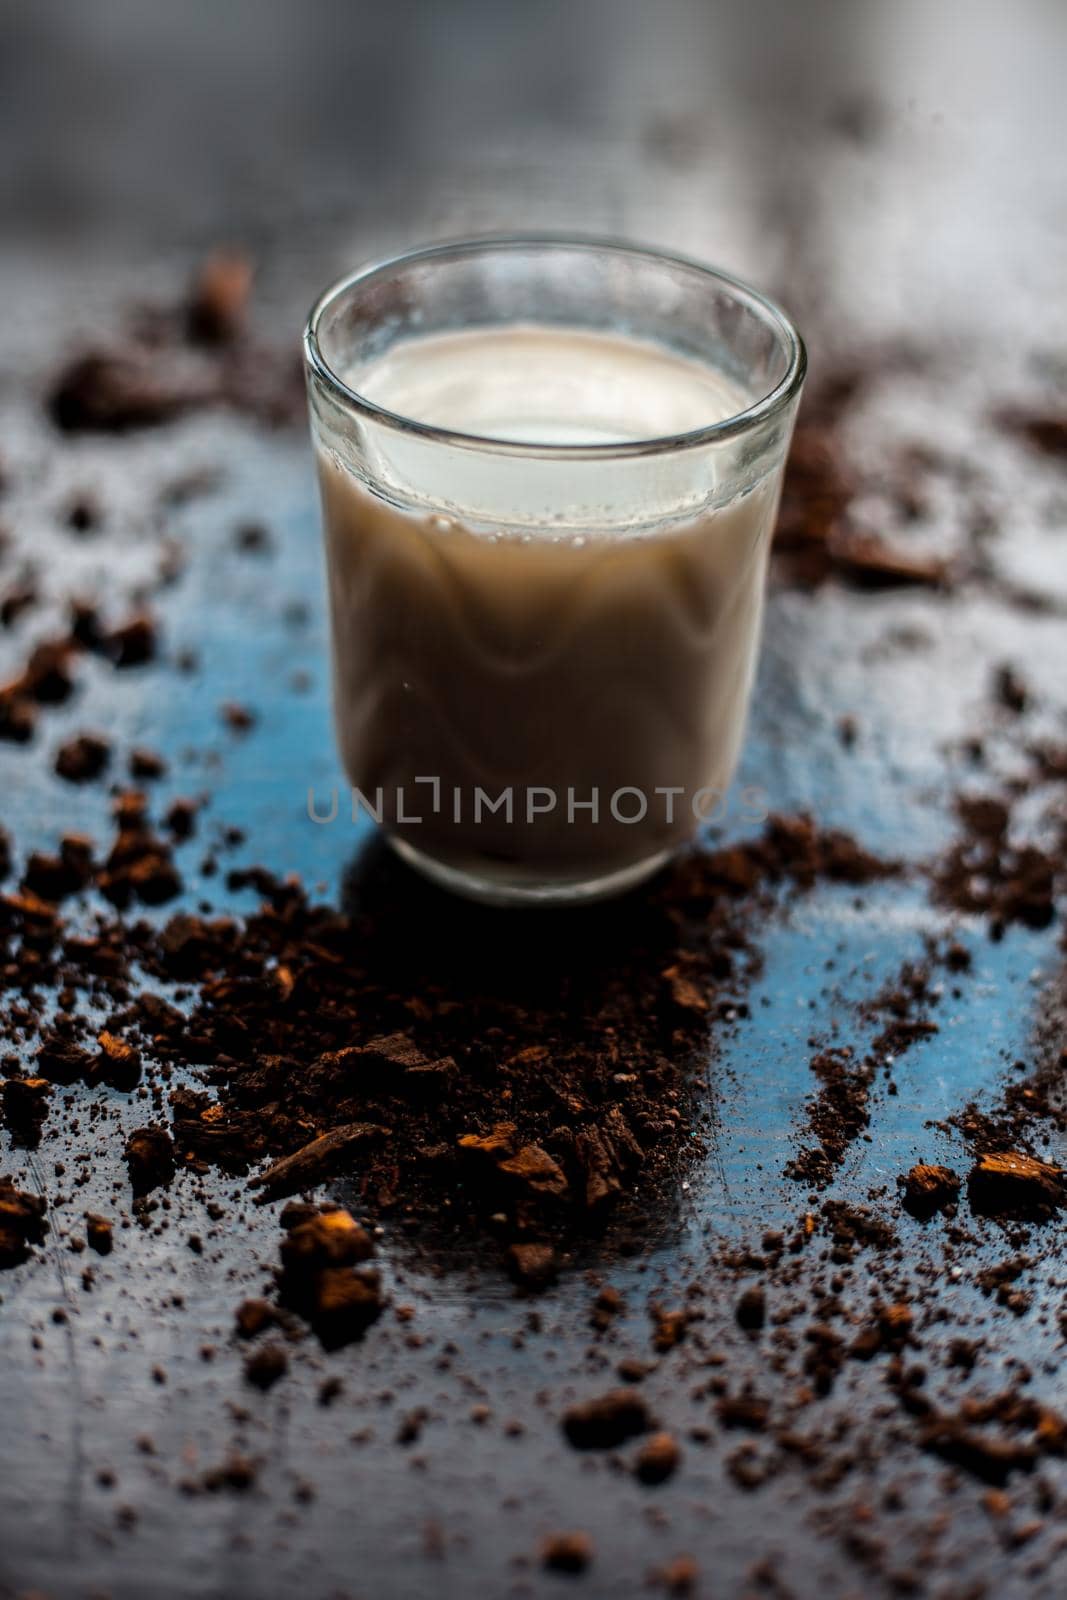 HIGH ANGLE SHOT OF GLASS OF MILK WITH SOME COCOA POWDER SPRINKLED ON BLACK GLOSSY SURFACE. by mirzamlk